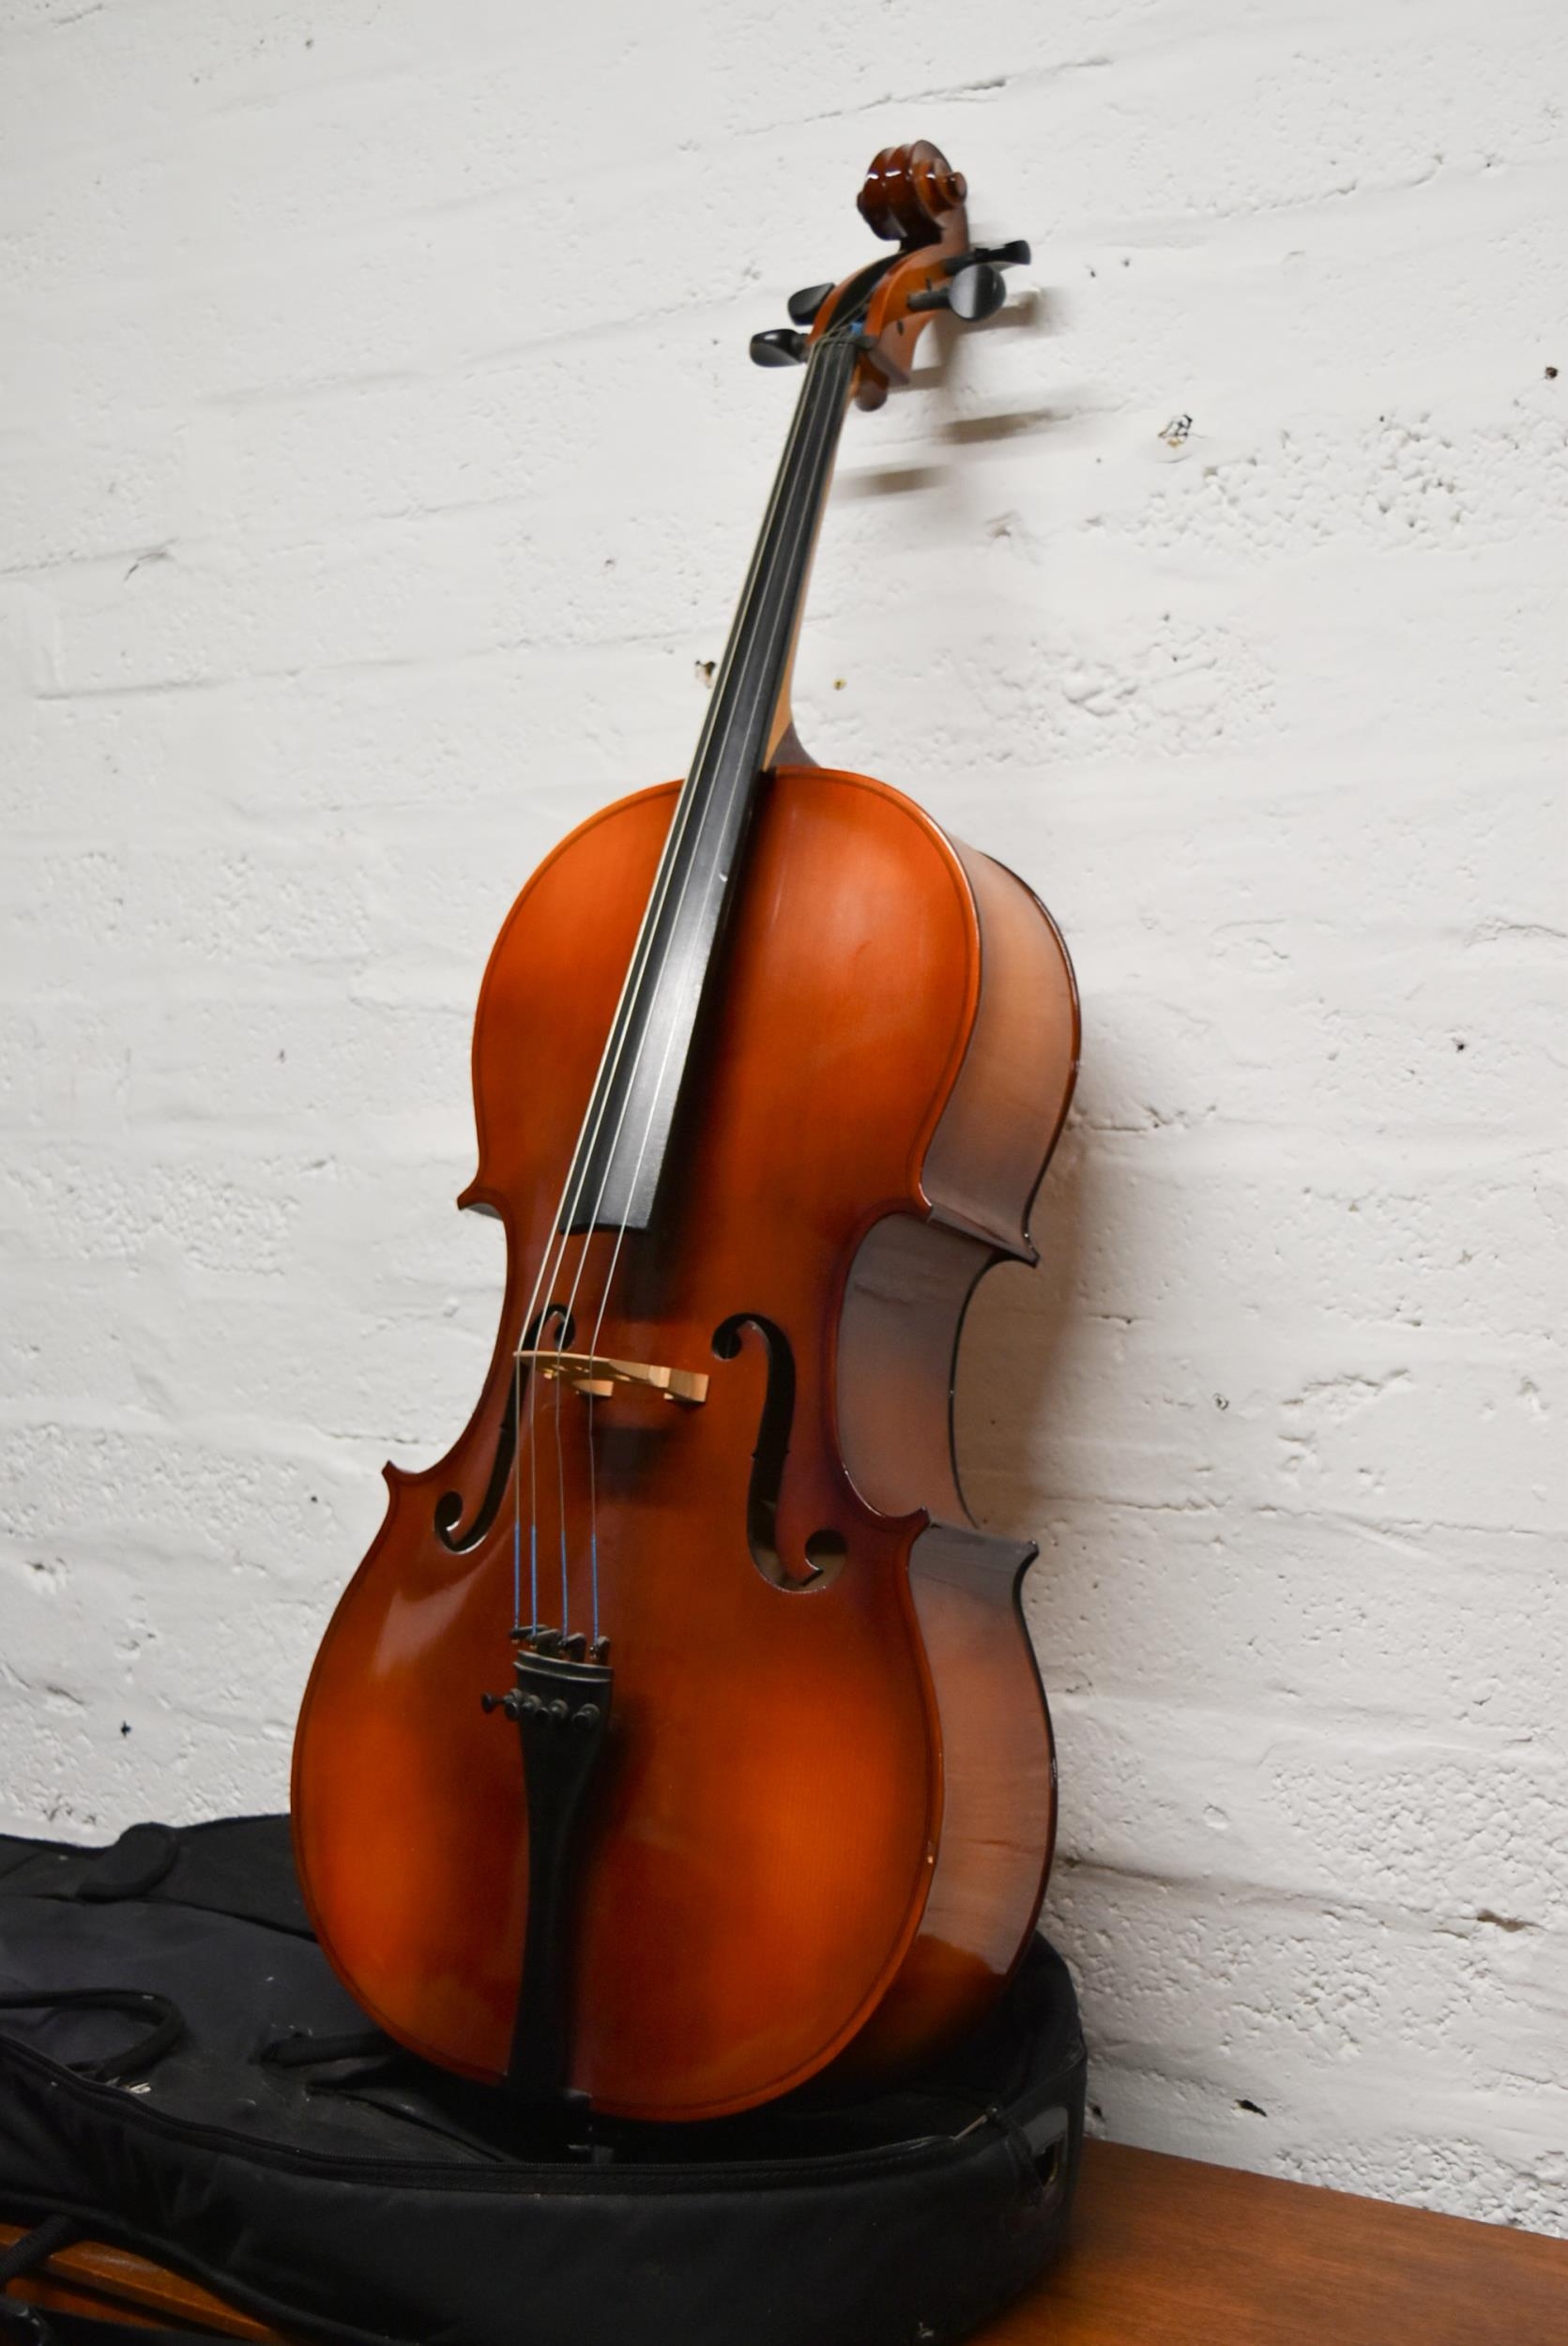 A modern cello and carrying case. - Image 3 of 10